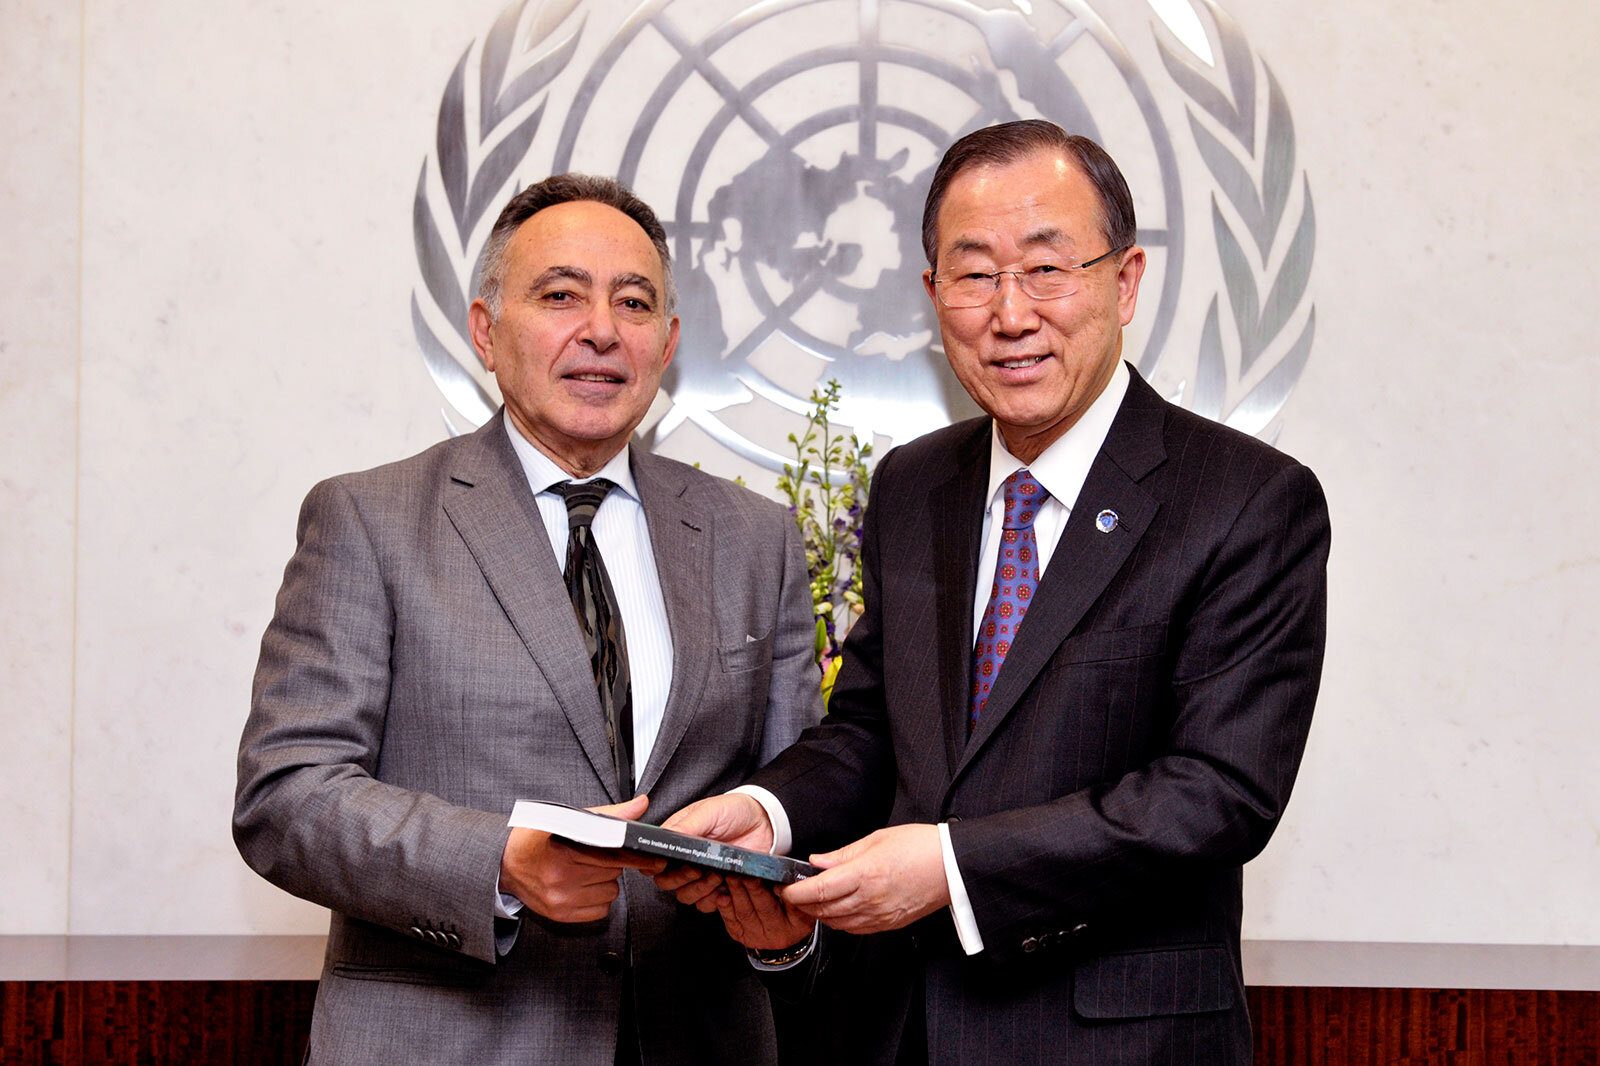 Egyptian human rights activist Bahey eldin Hassan, pictured here with former Secretary-General of the United Nations, Ban Ki-Moon (Photo: Mark Garten)